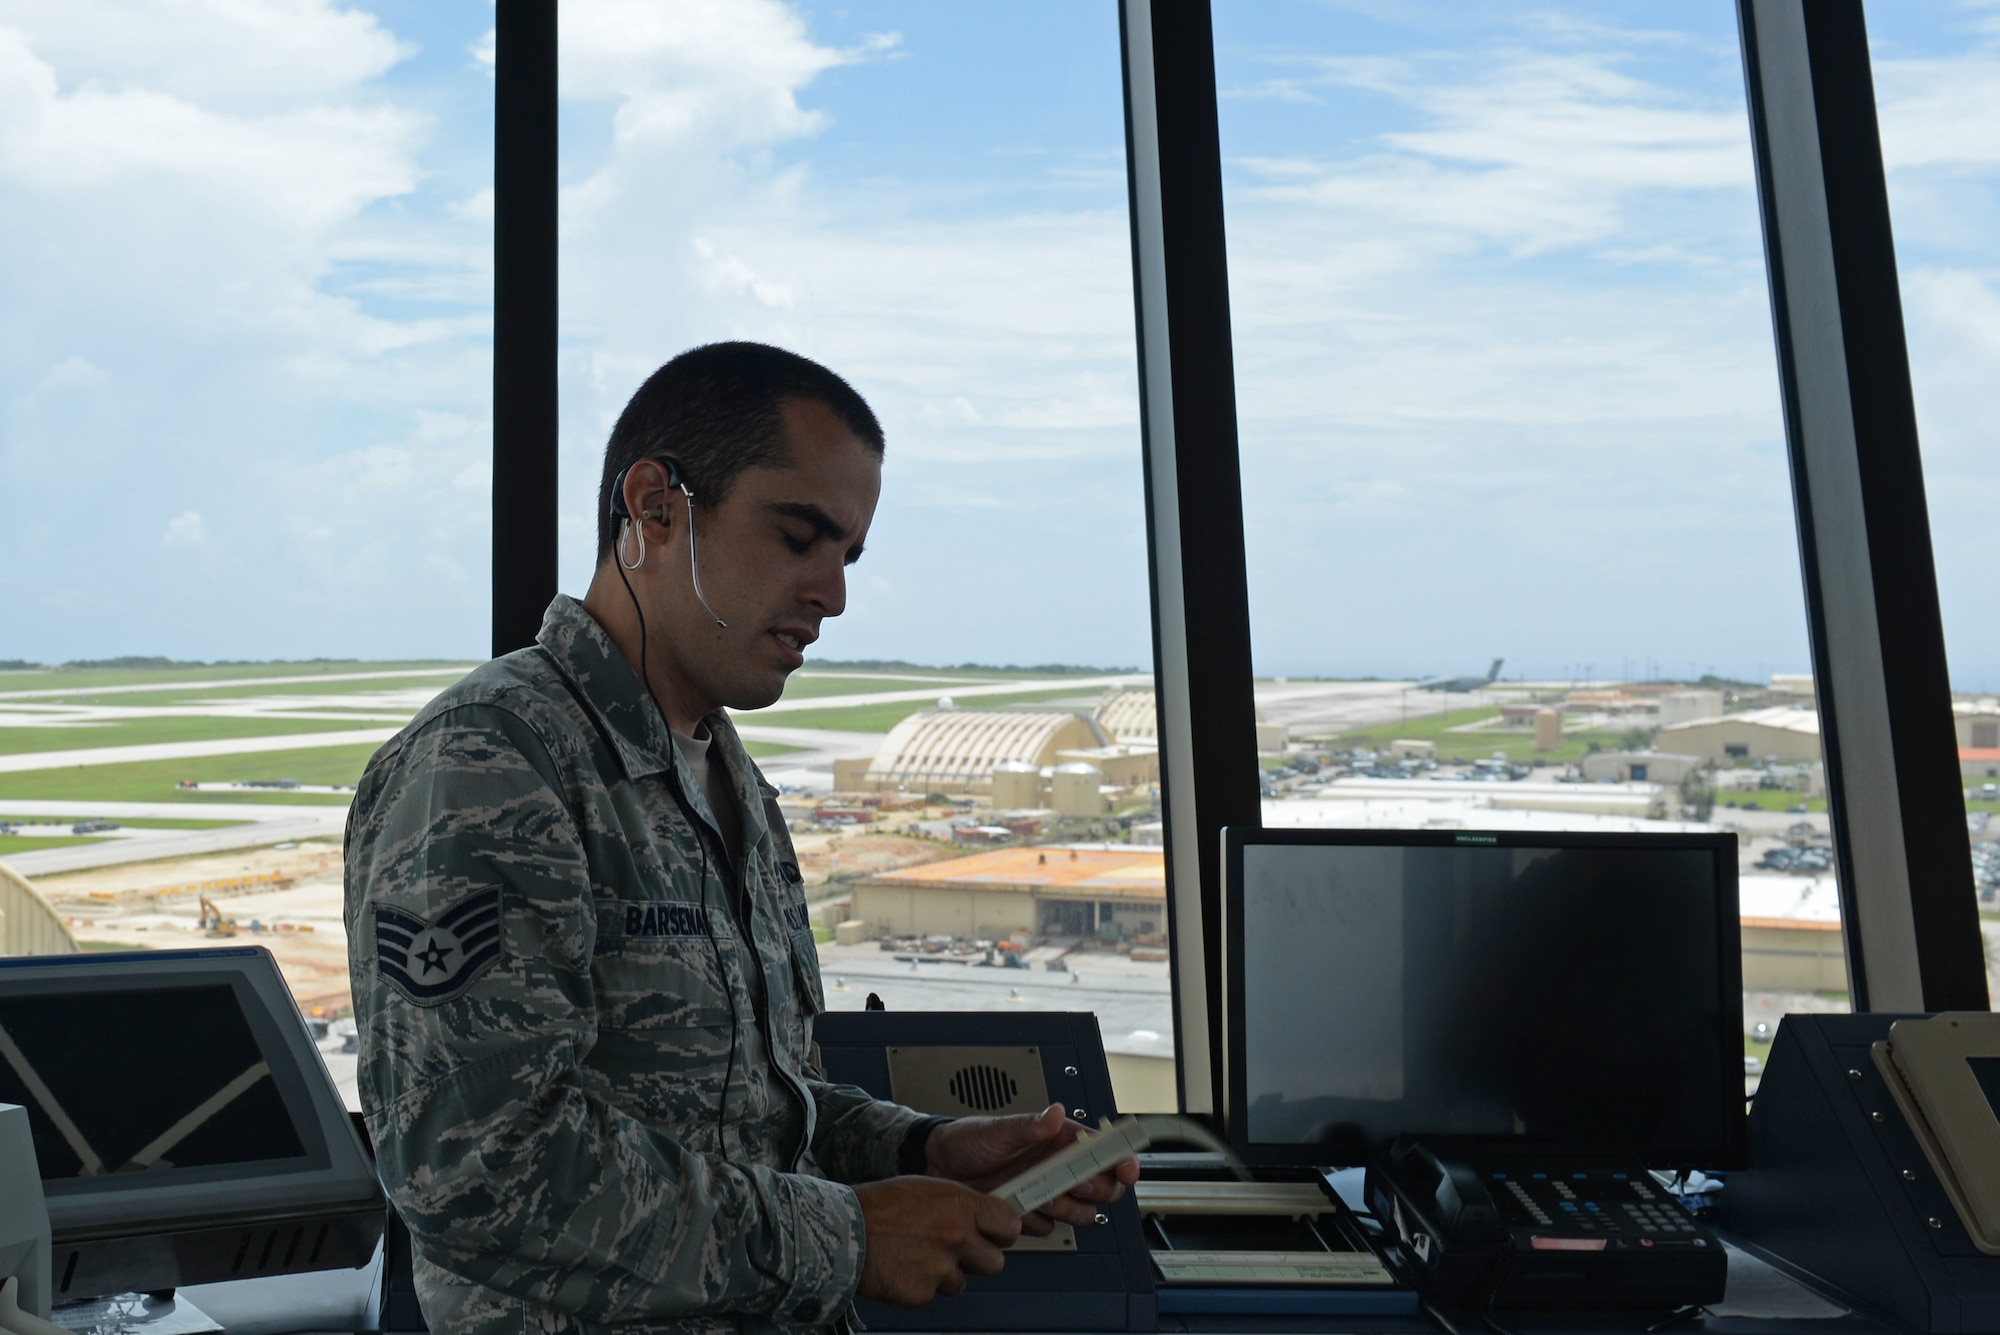 U.S. Air Force Staff Sgt. Nicholas Barsenas, 36th Operation Support Squadron air traffic controller, speaks with pilots on July 17, 2017, at Andersen Air Force Base, Guam. Air traffic control Airmen assigned to the 36th Operation Support Squadron began work in the new tower cab here June 30 after spending almost three months working in the mobile tower unit on the flightline. (U.S. Air Force photo by Airman 1st Class Gerald Willis)